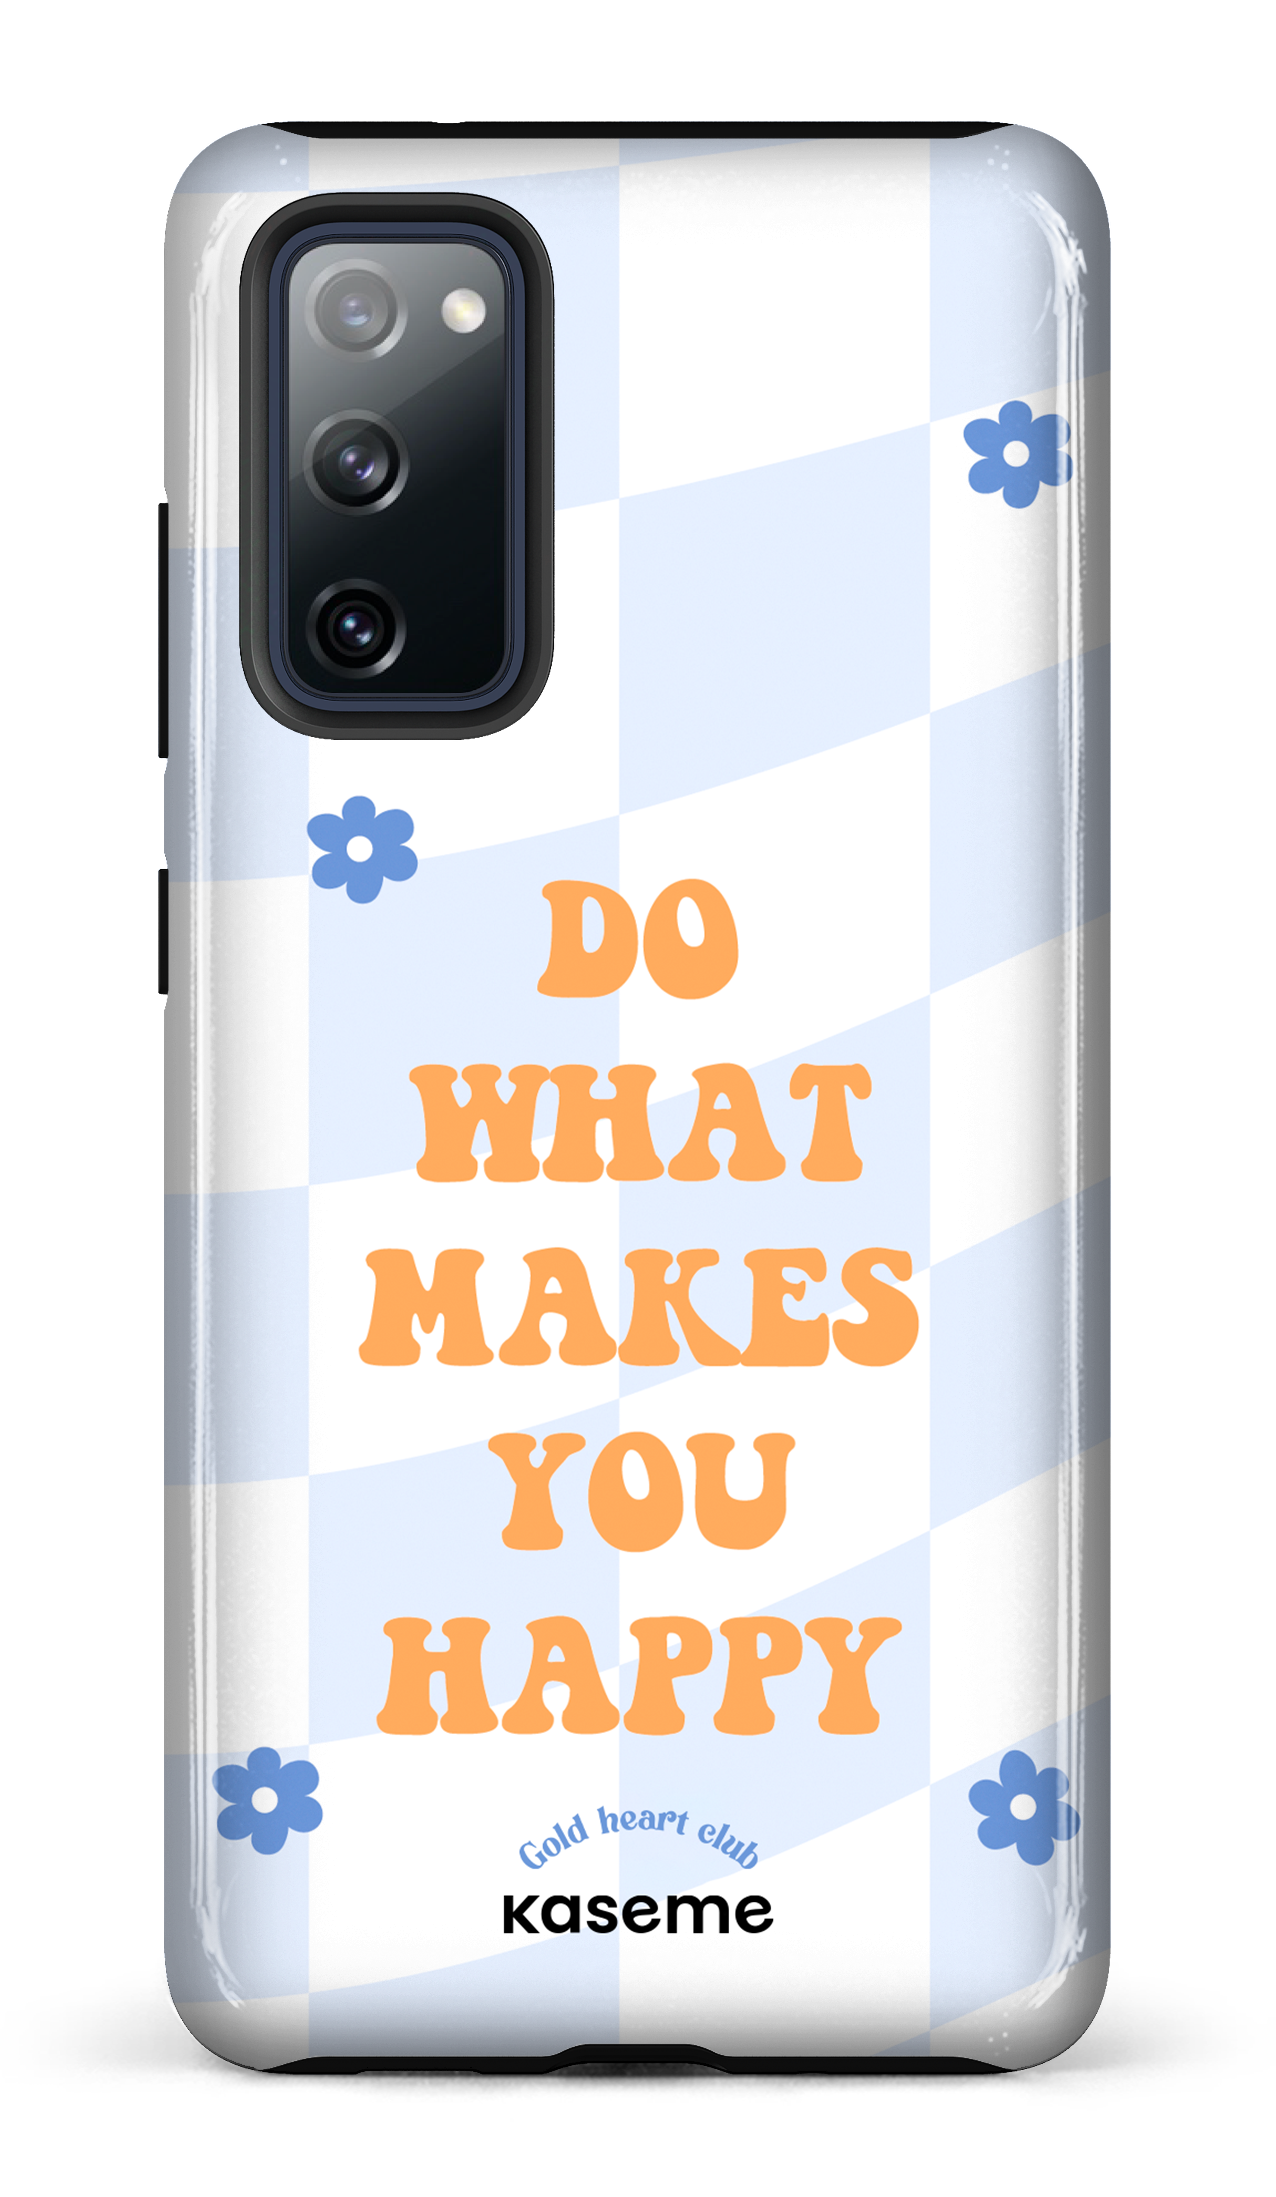 Do What Makes You Happy by Goldheartclub - Galaxy S20 FE